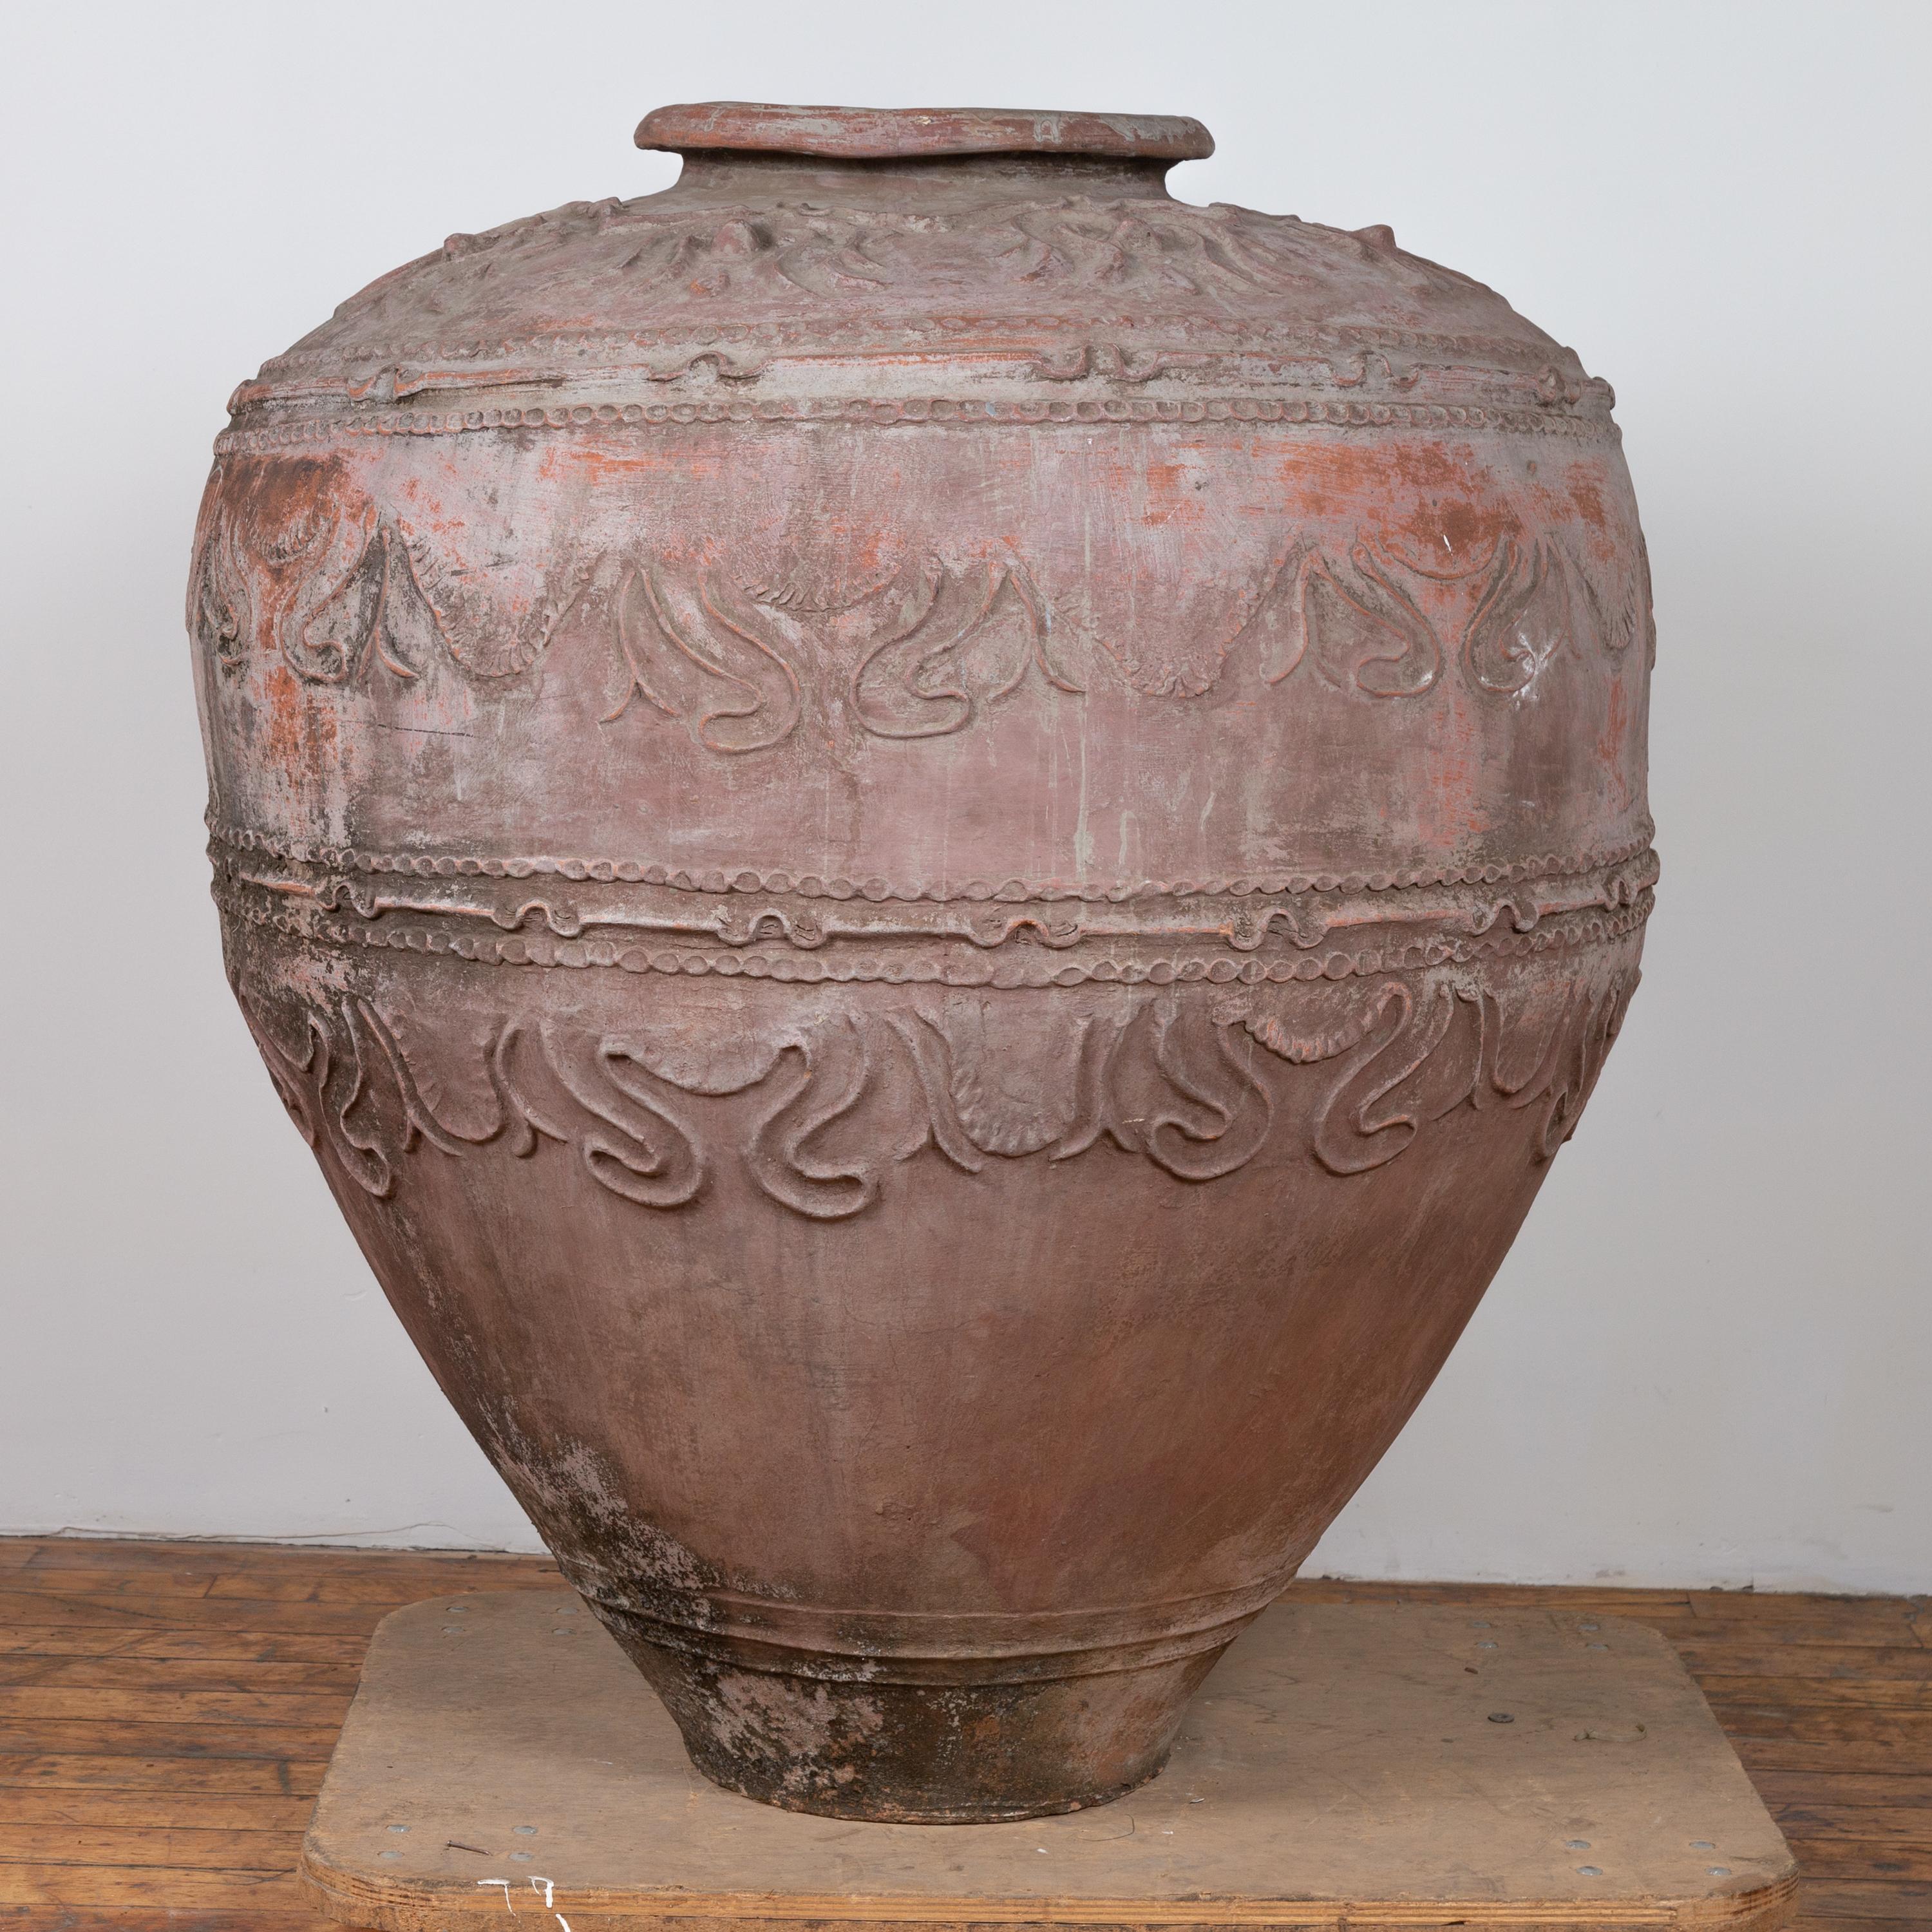 A large antique Indonesian terracotta water jar with wavy patterns, hollow beaded motifs and nicely weathered appearance. Born in Indonesia, this terracotta jar attracts our attention with its large proportions and aged patina. Presenting a thin lip